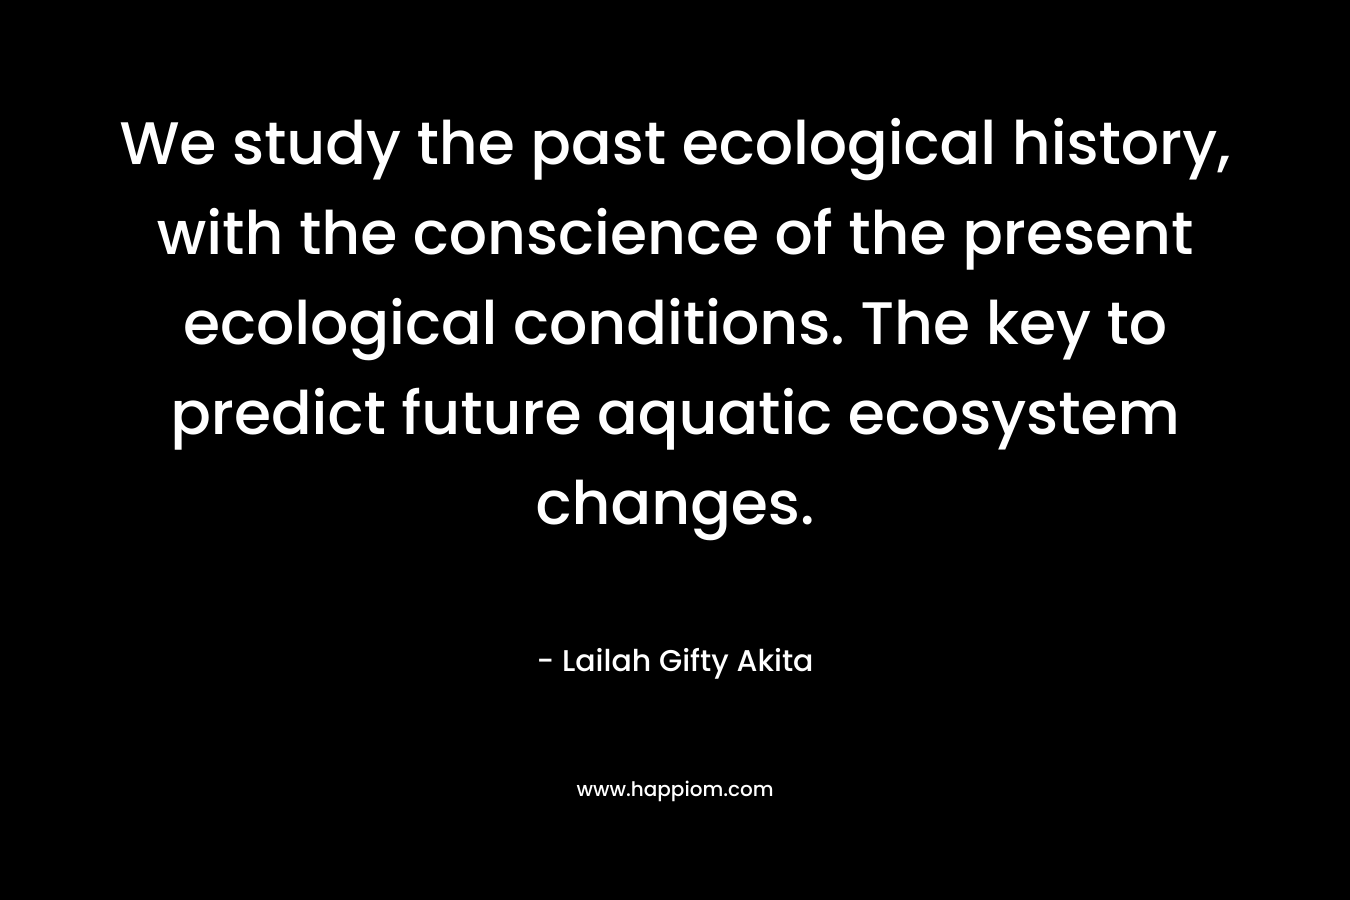 We study the past ecological history, with the conscience of the present ecological conditions. The key to predict future aquatic ecosystem changes.